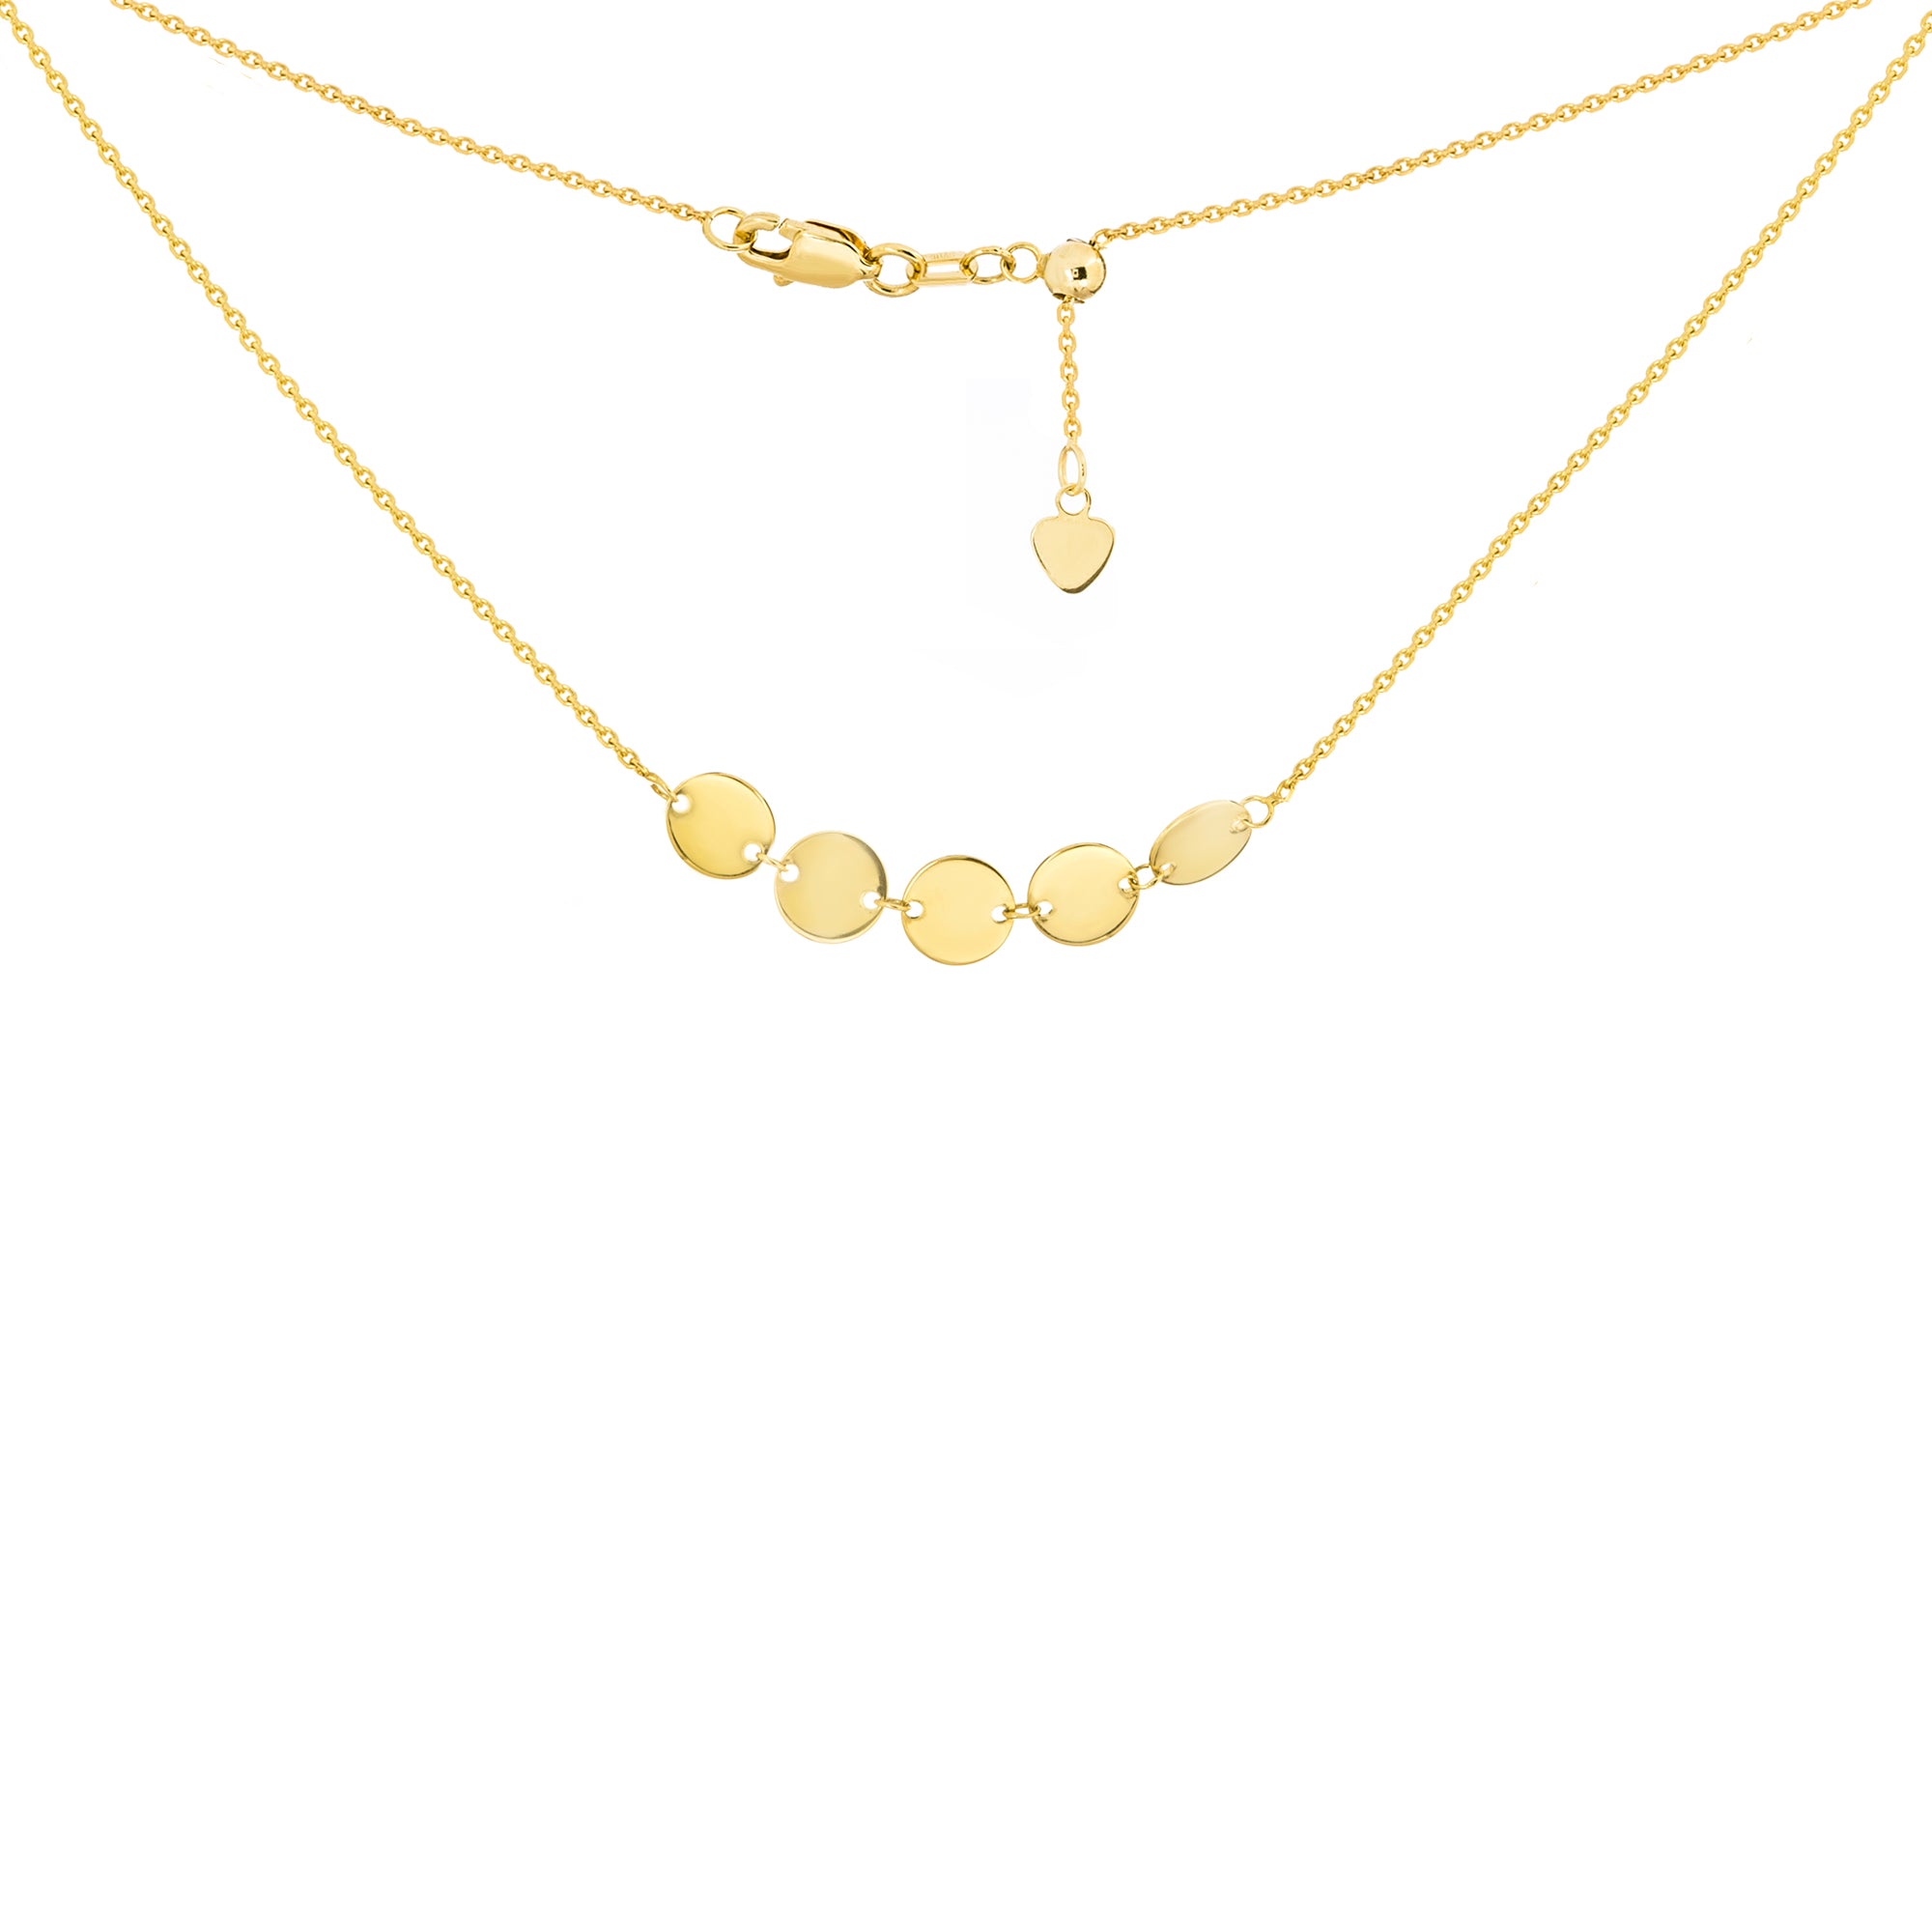 14K Yellow Gold 5 Mini Disc Choker Necklace with adjustable Chain